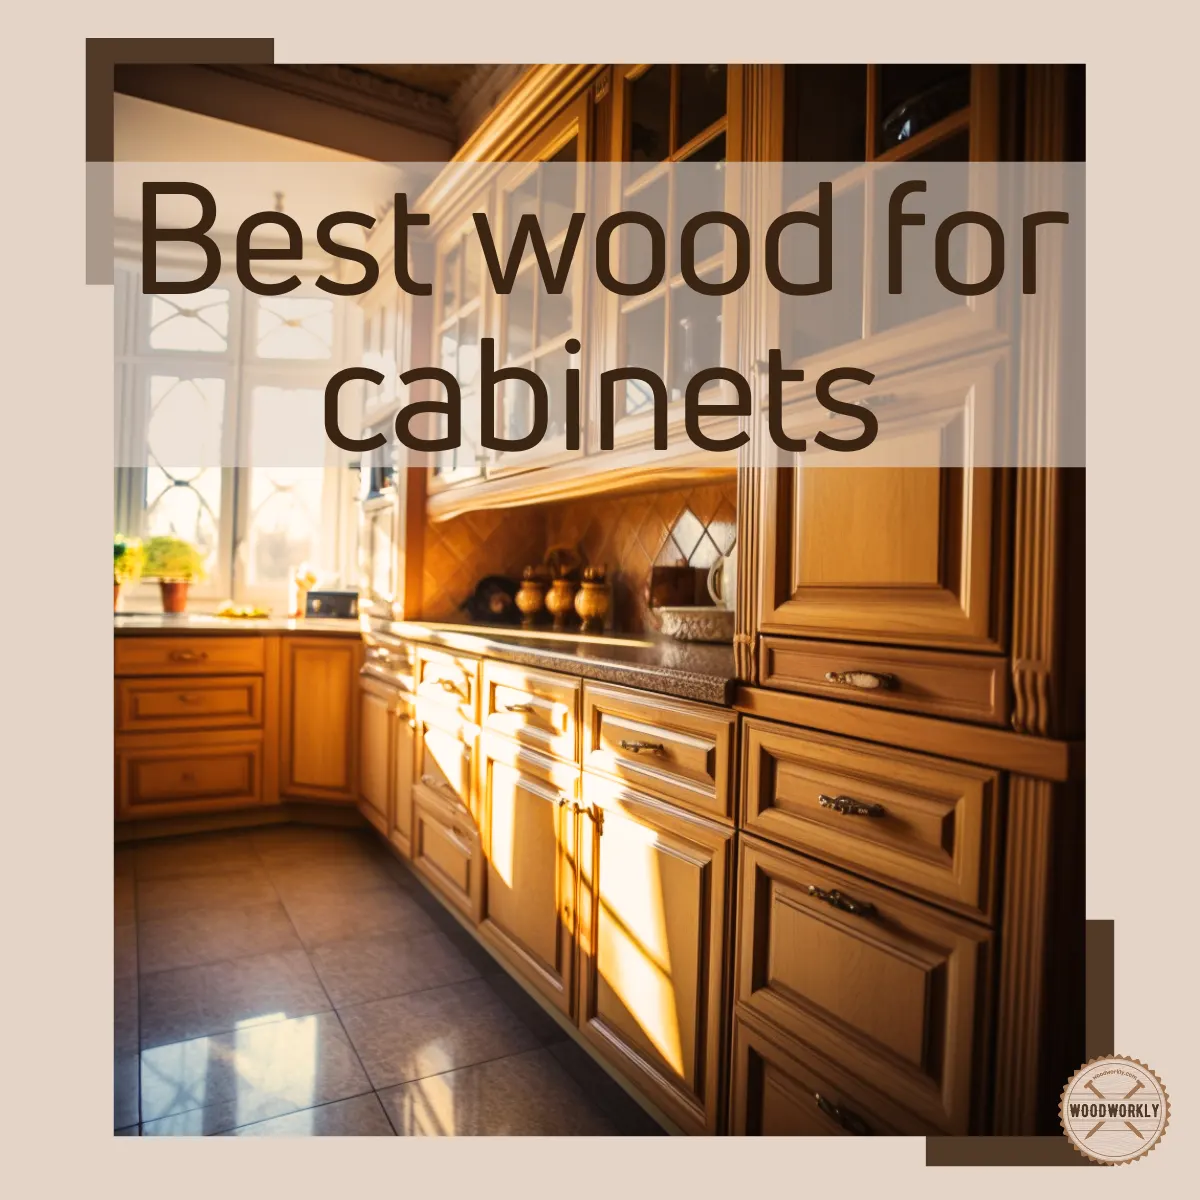 Best wood for cabinets